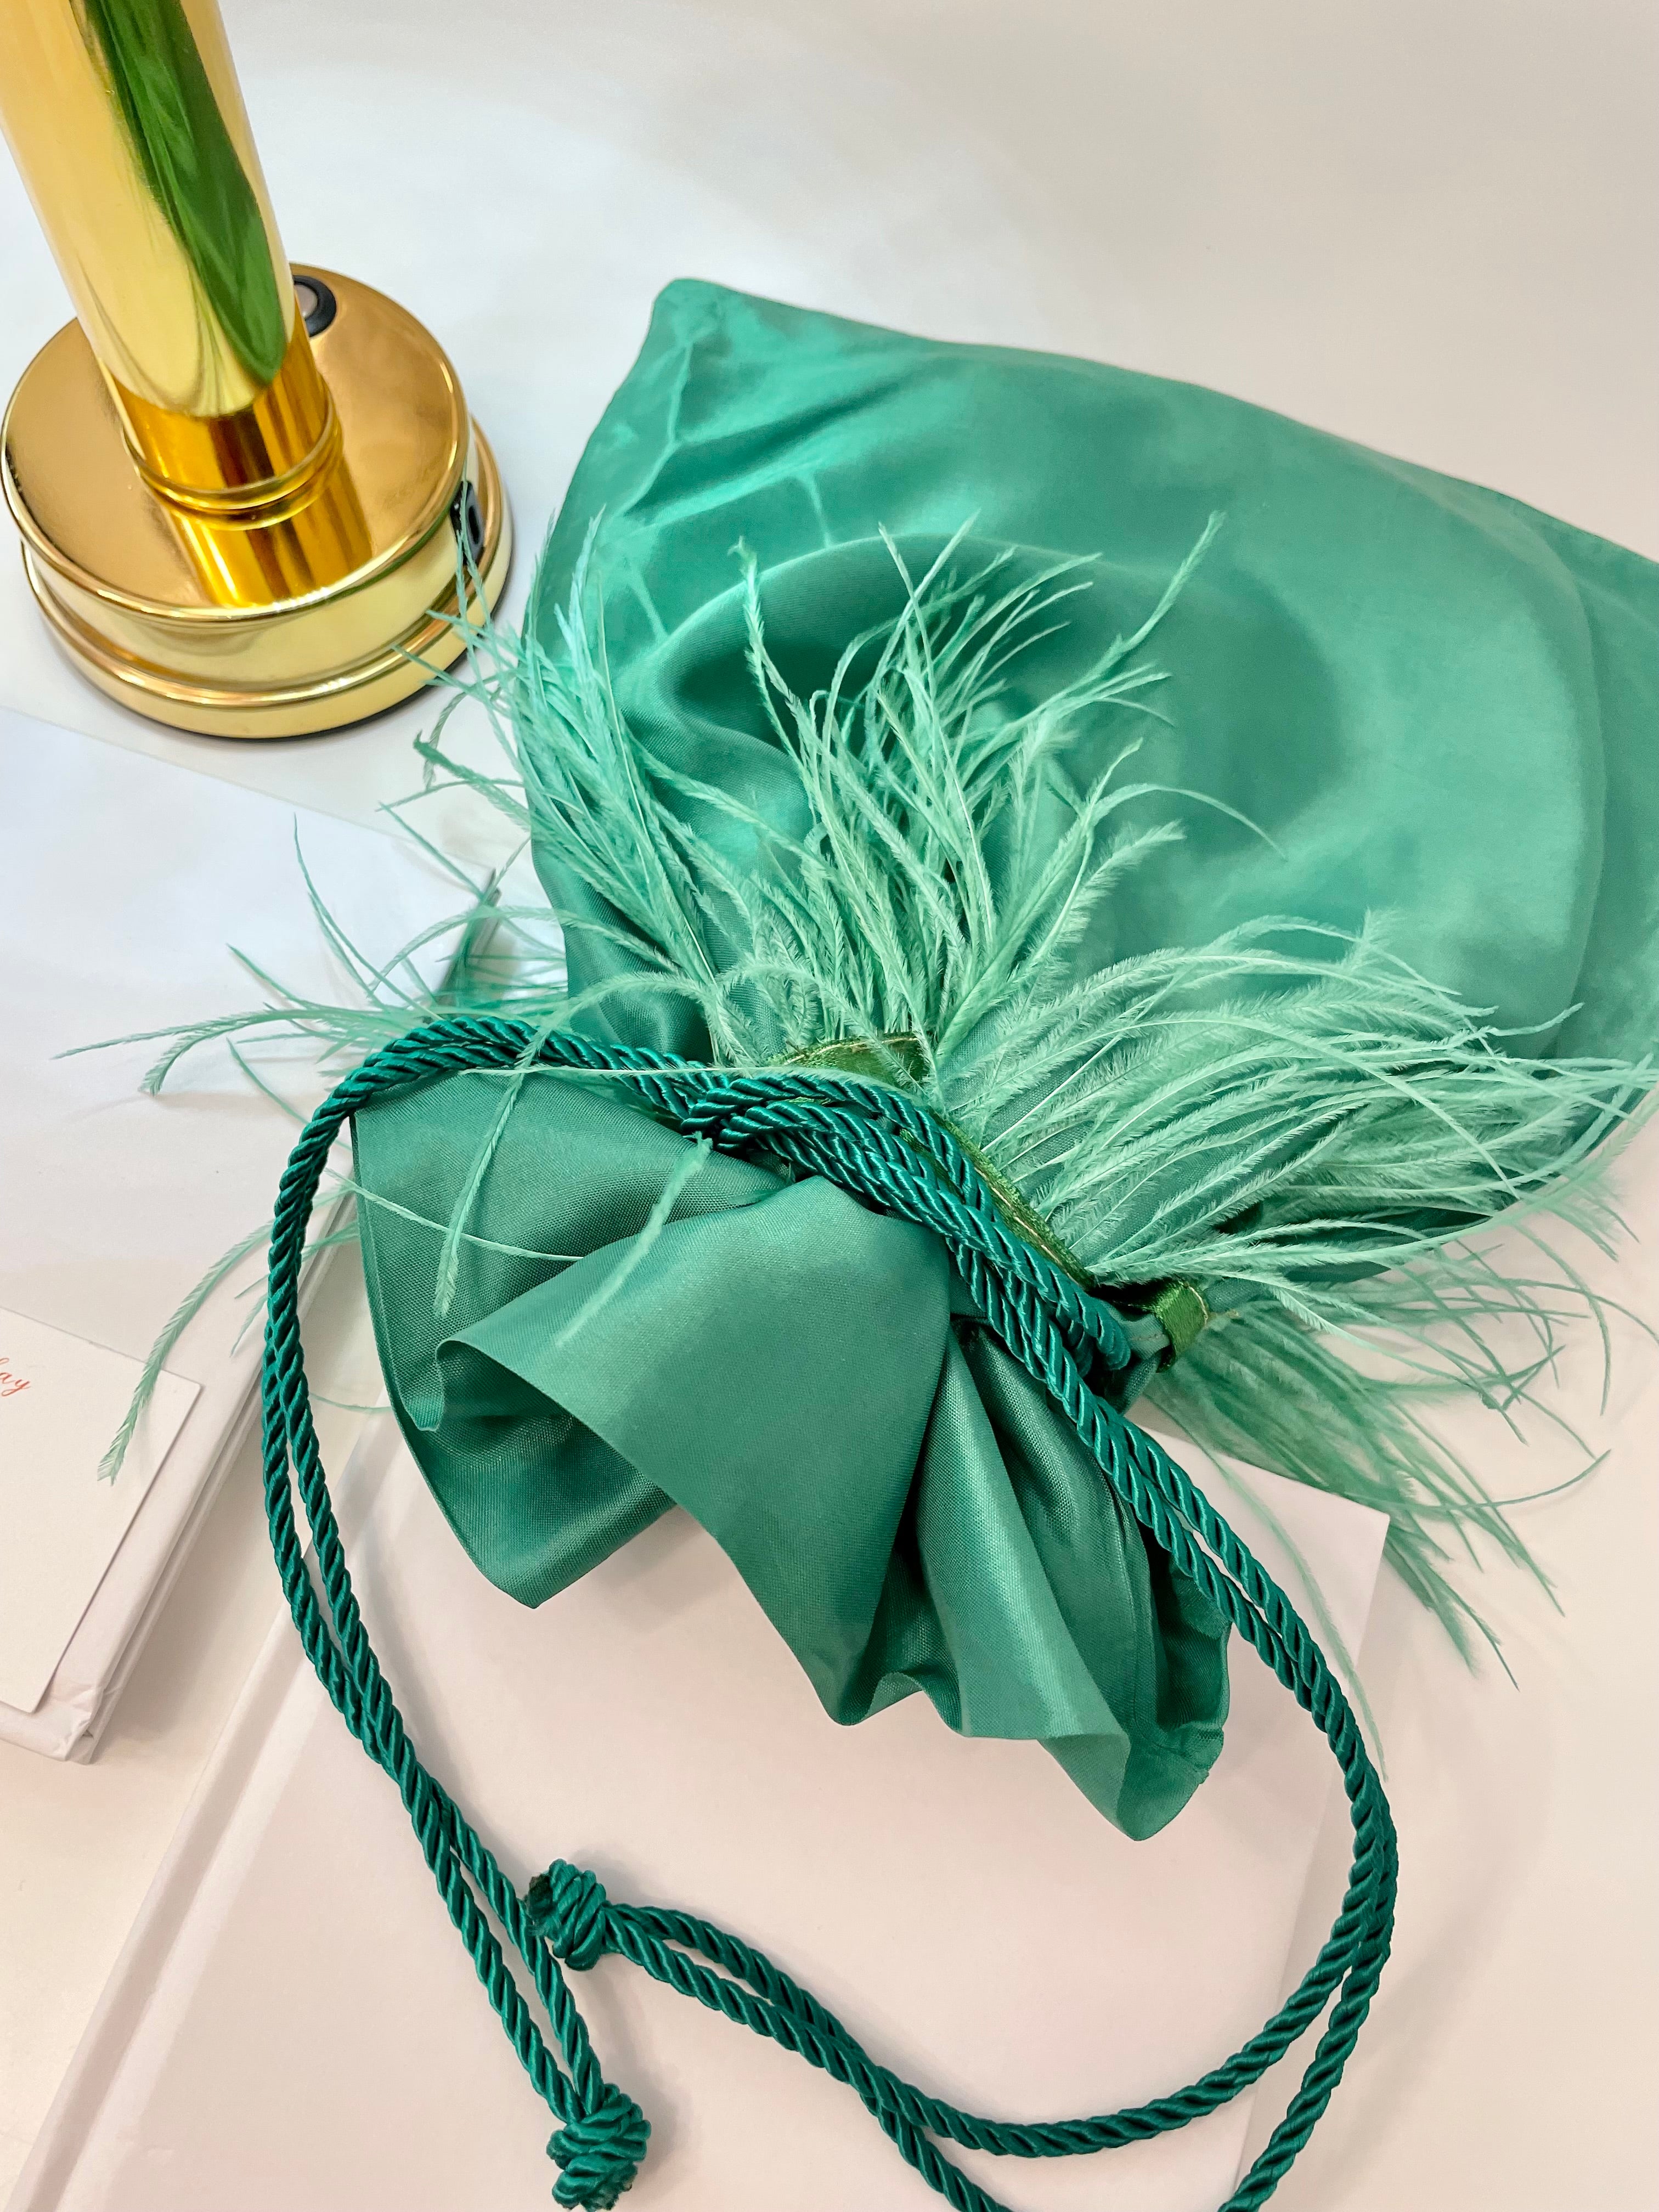 Vintage Italian emerald satin bag, adorned with ostrich feathers...so elegant!